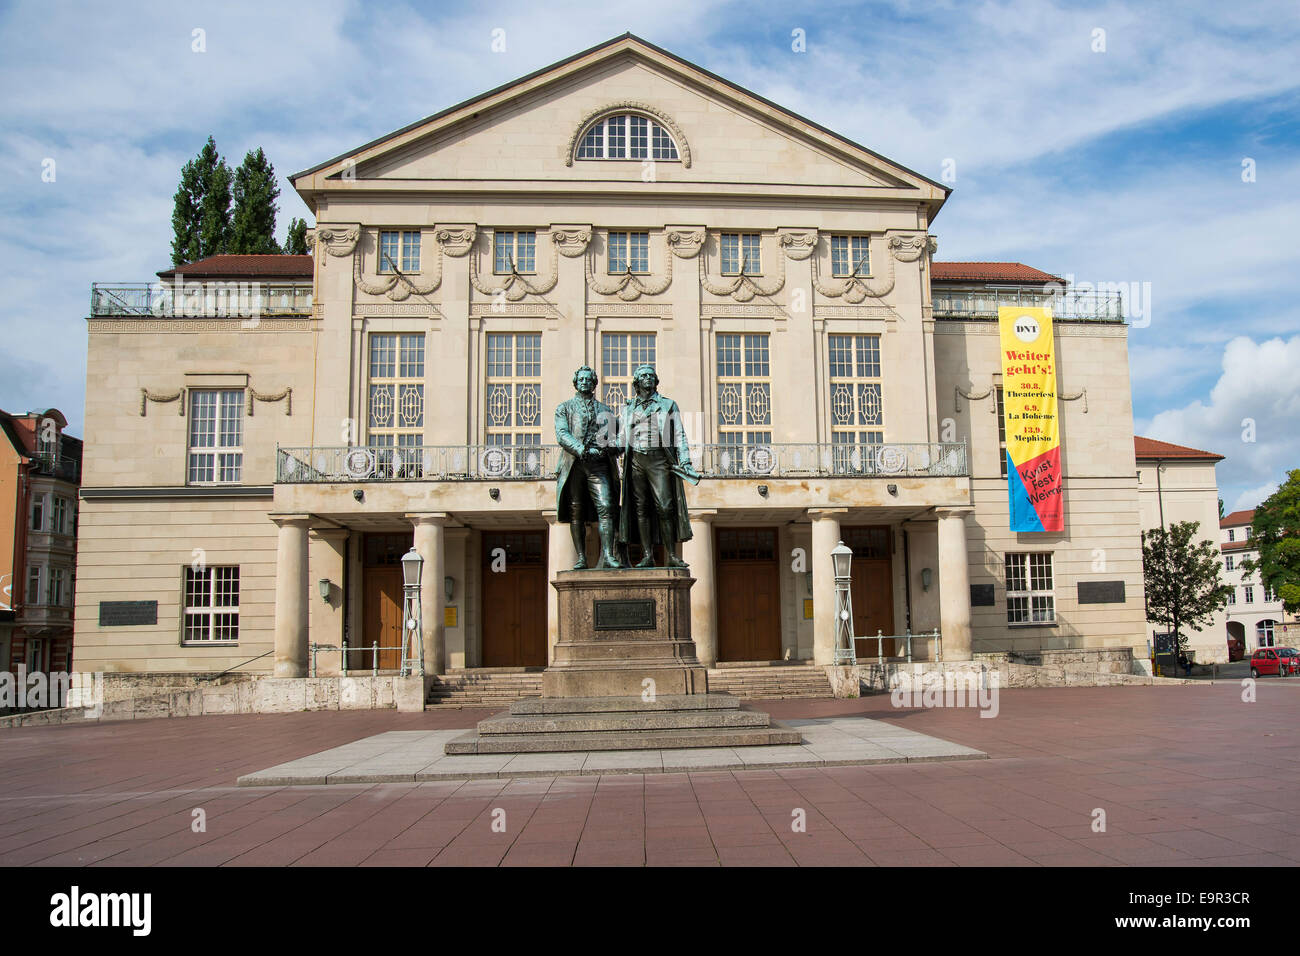 The Goethe-Schiller Monument in front of the Deutsches National theater and Staatskapelle Wiemar, Weimar, Germany, Europe Stock Photo